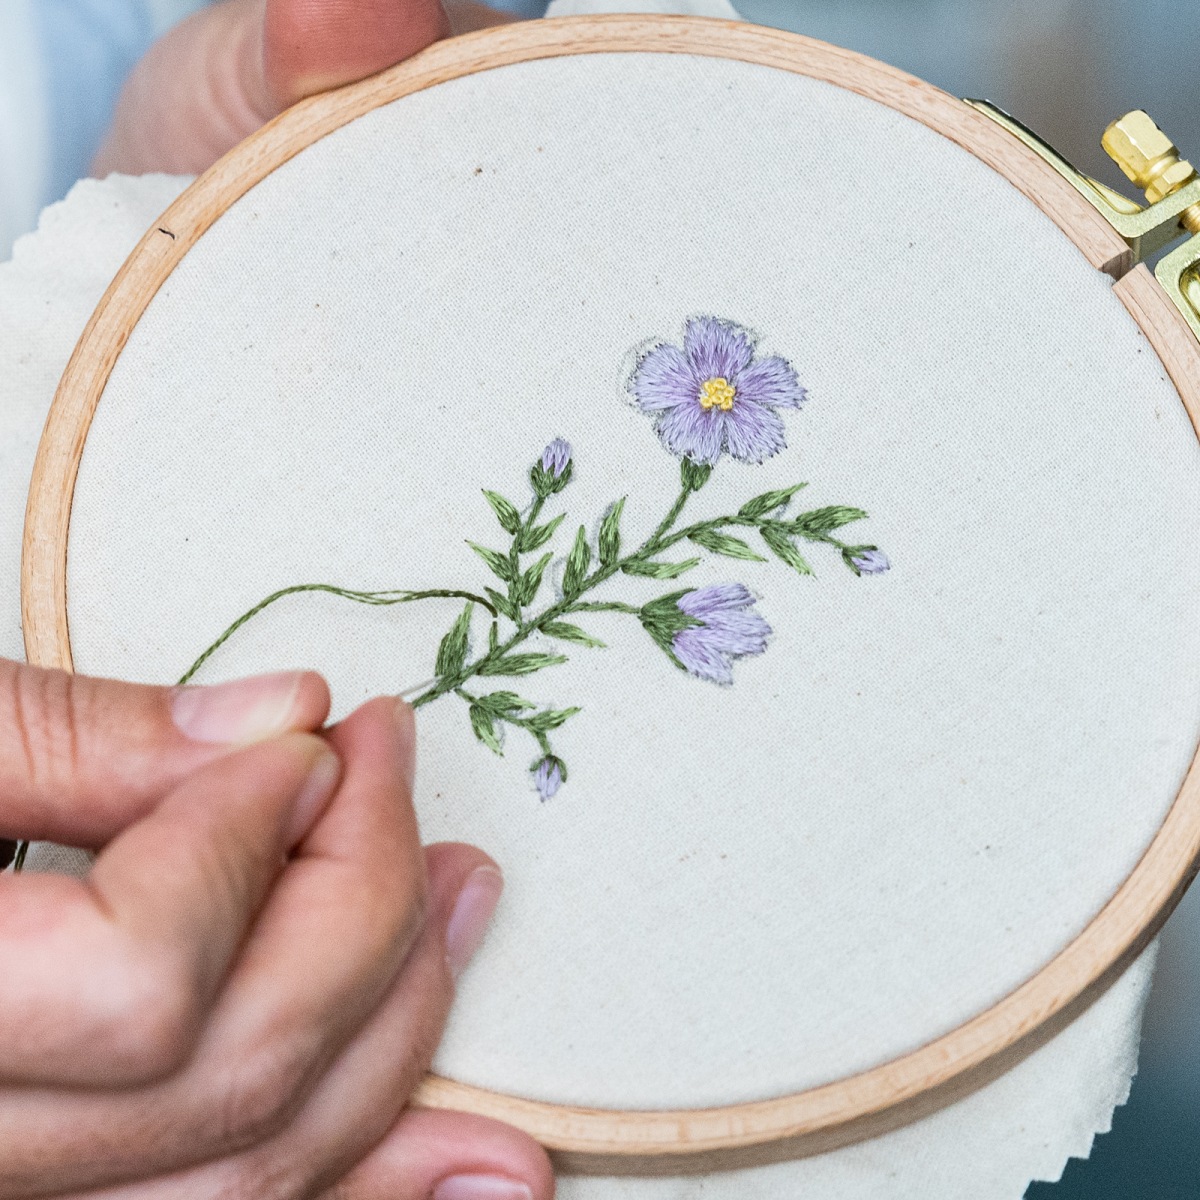 How to Remove Embroidery Step-by-step Guide